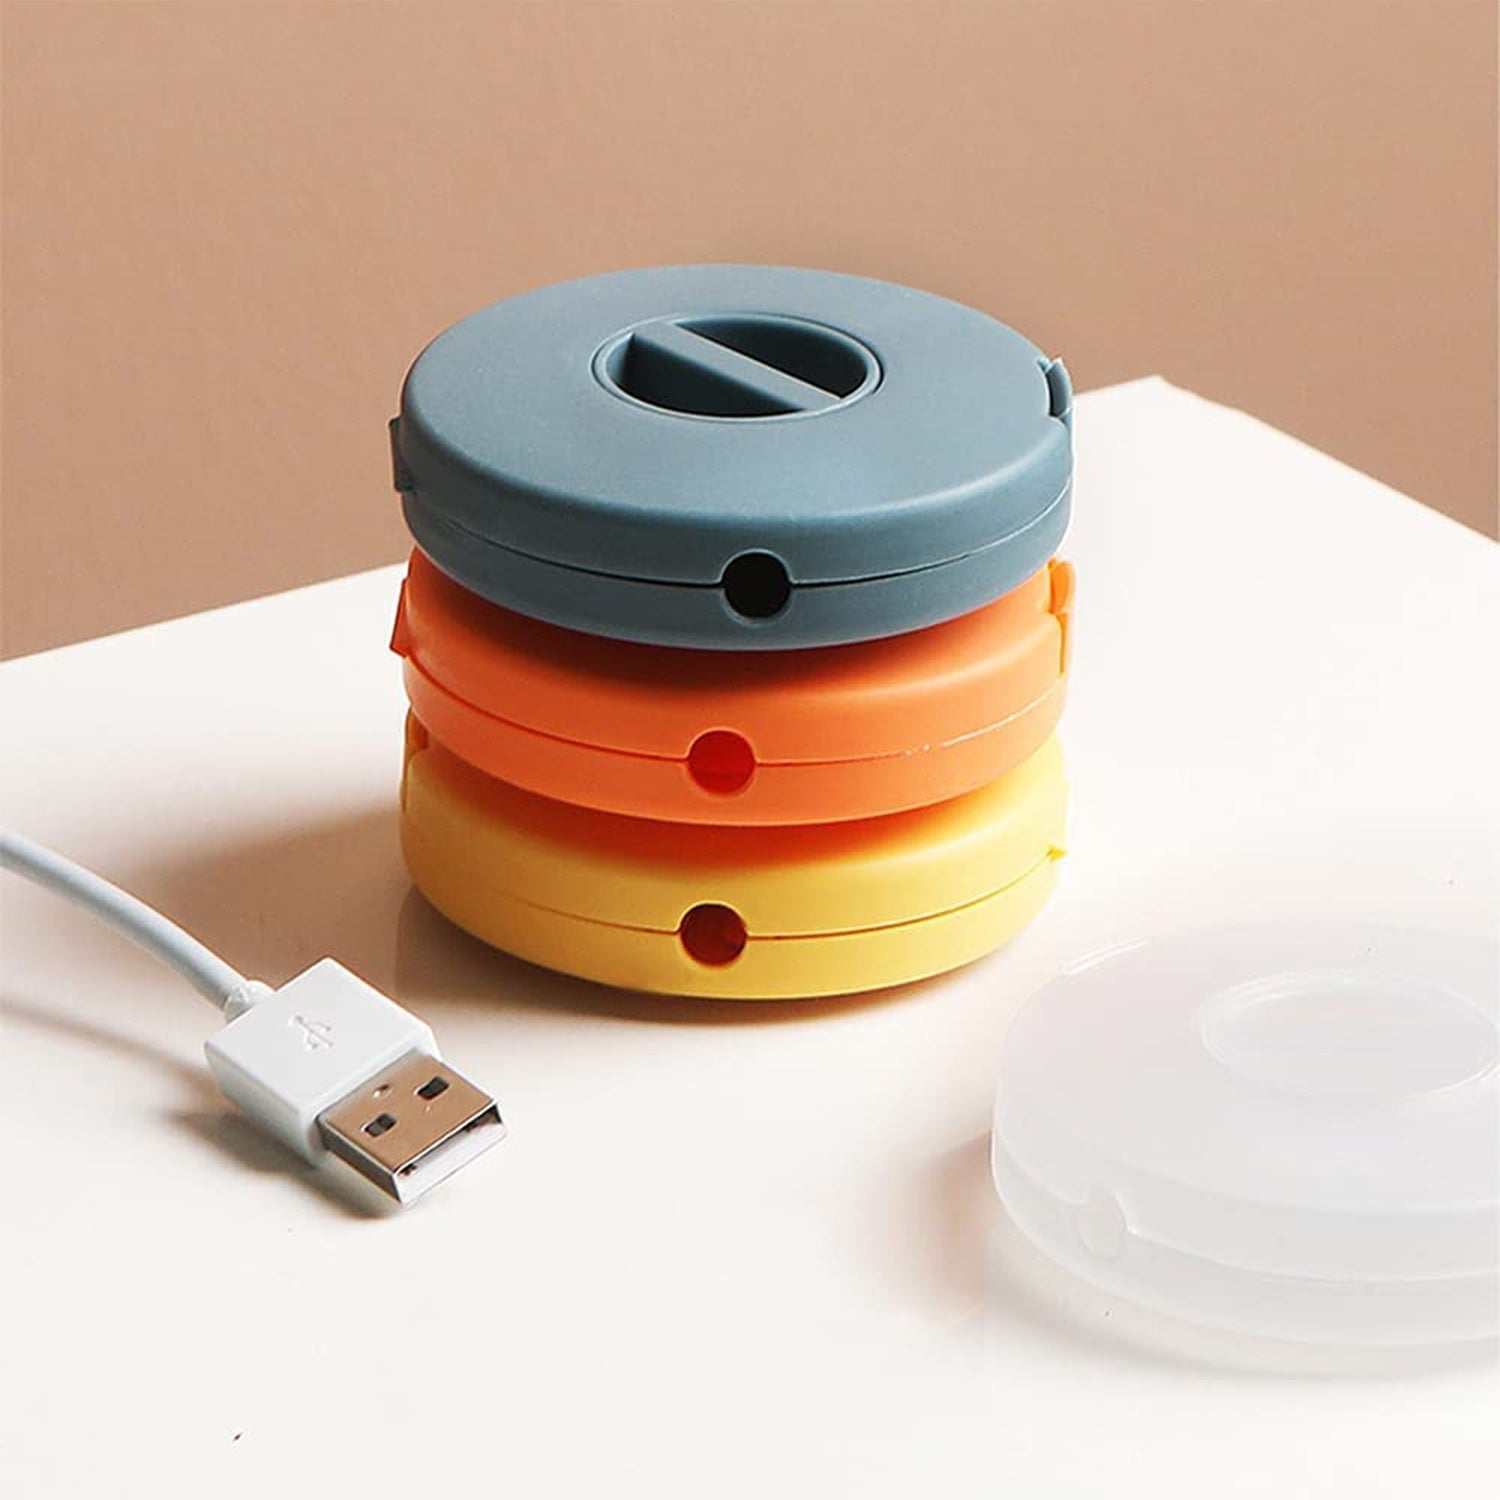 6155 cable storage Box widely used for storing and managing cable wires and all.